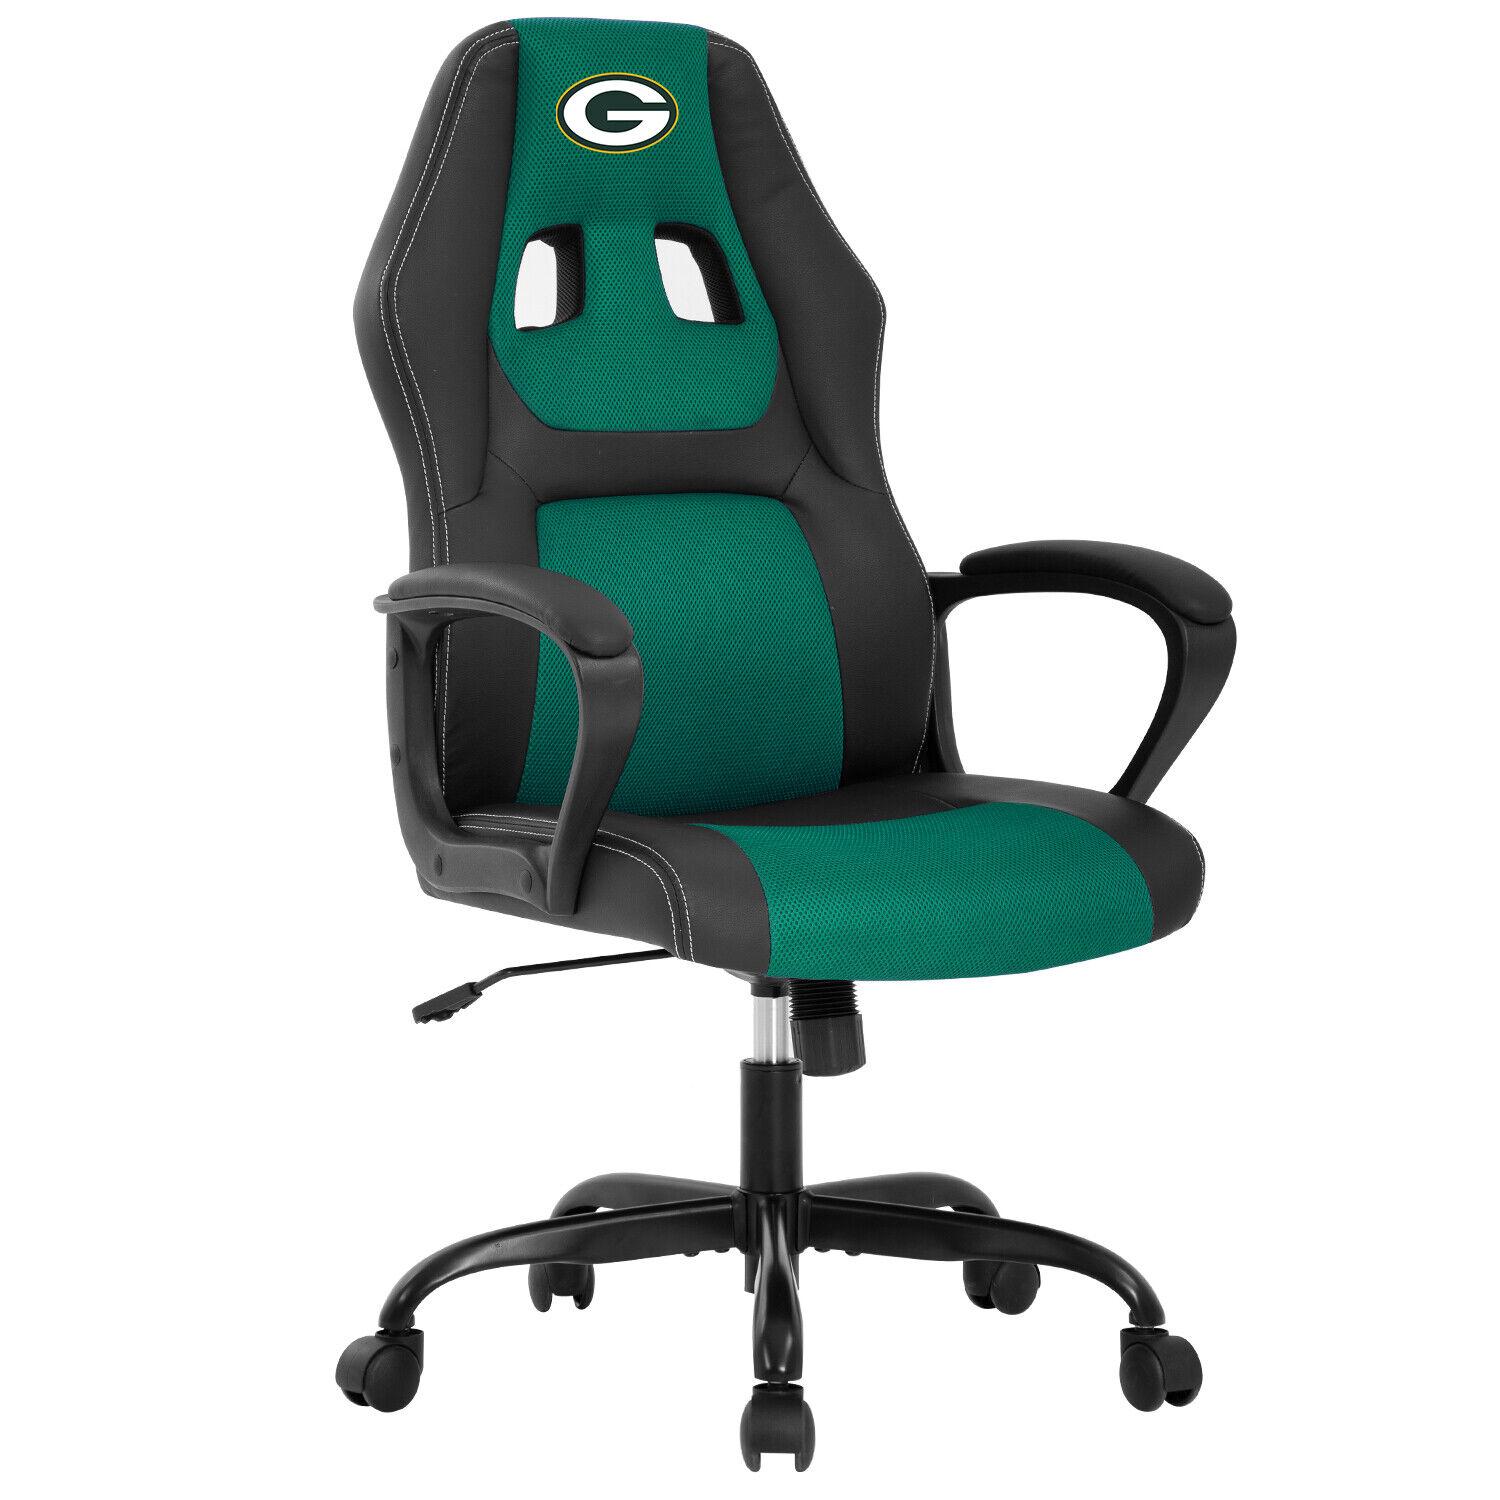 NFL Football Office Chair PC Gaming Chair Cheap Desk Chair for $43.99 Shipped